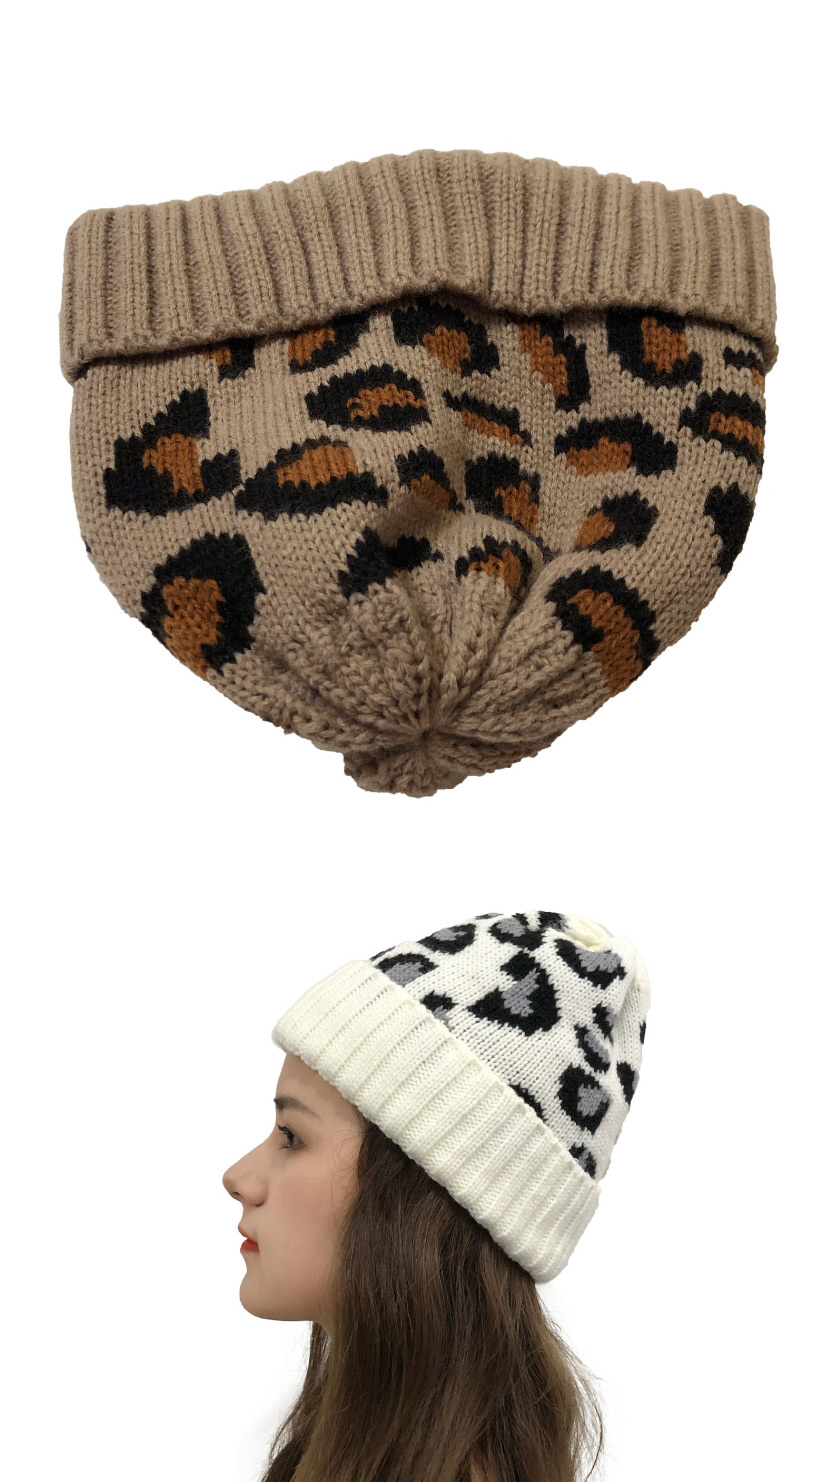 Fashion Camel Leopard Jacquard Knitted Beanie,Knitting Wool Hats